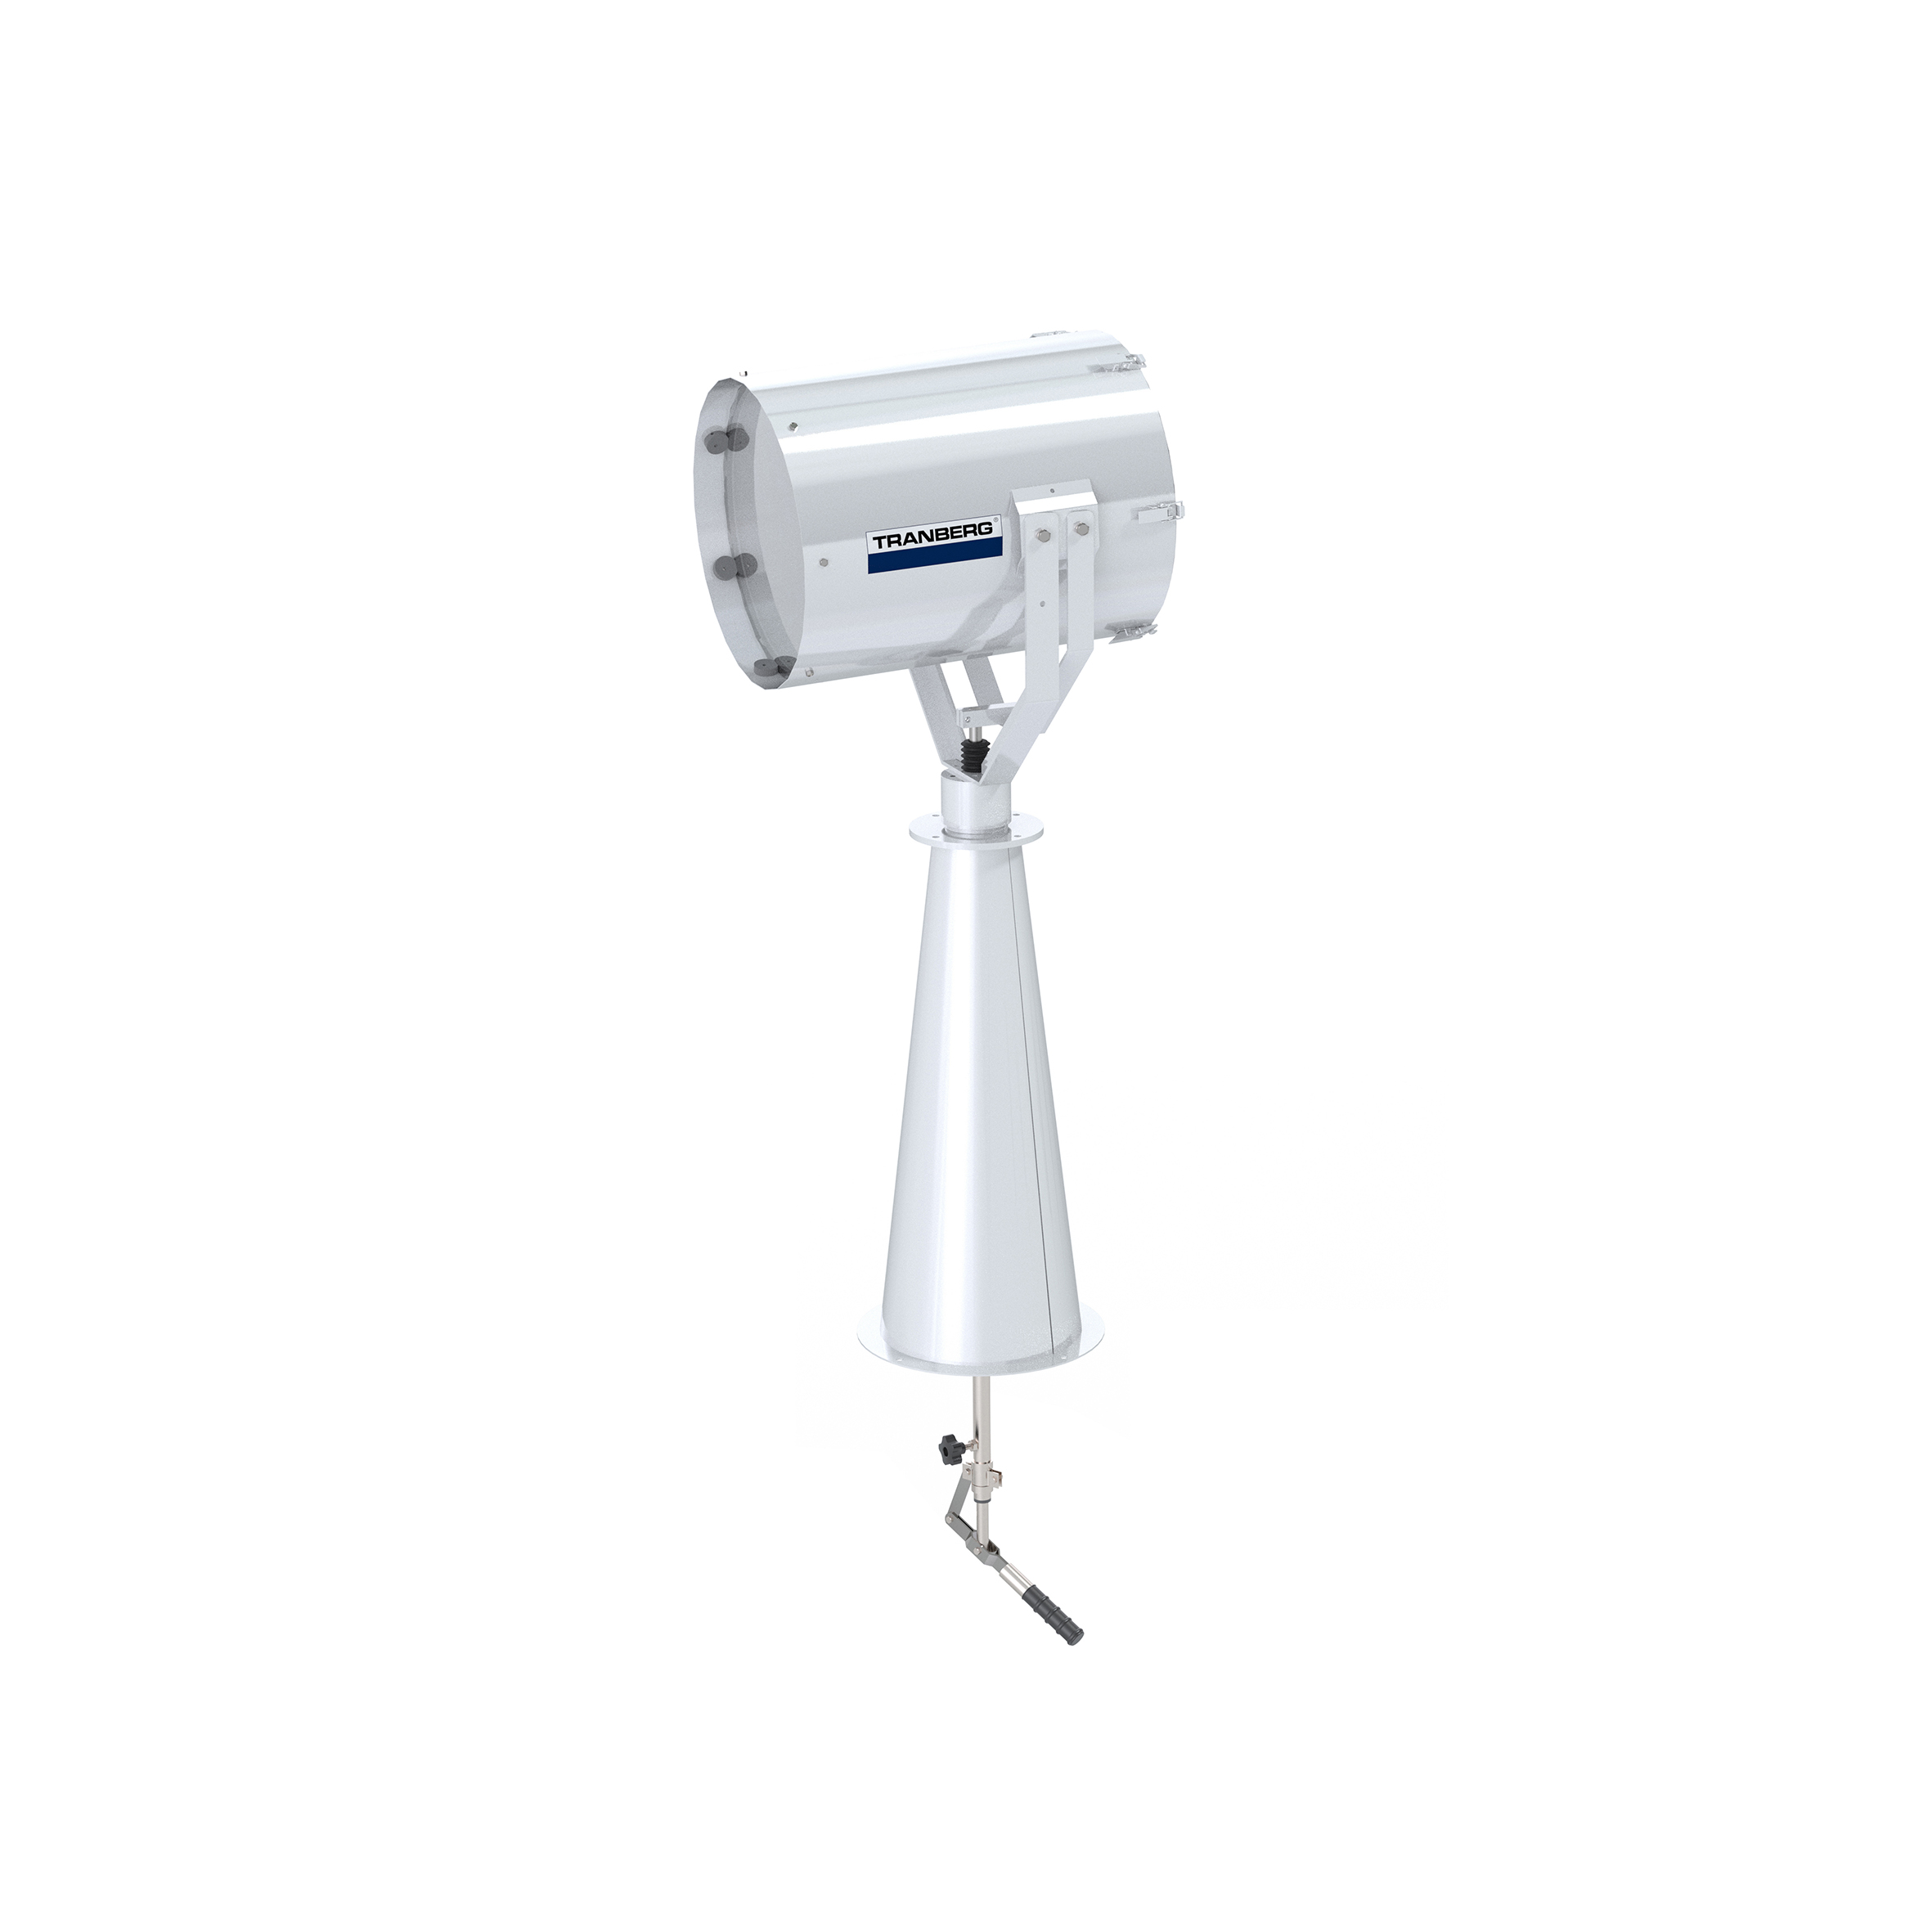 TEF 2630 Searchlight: Halogen 1000W bulb incl, 230V, Bridge Controlled, Stainless Steel, W/300 mm pe photo